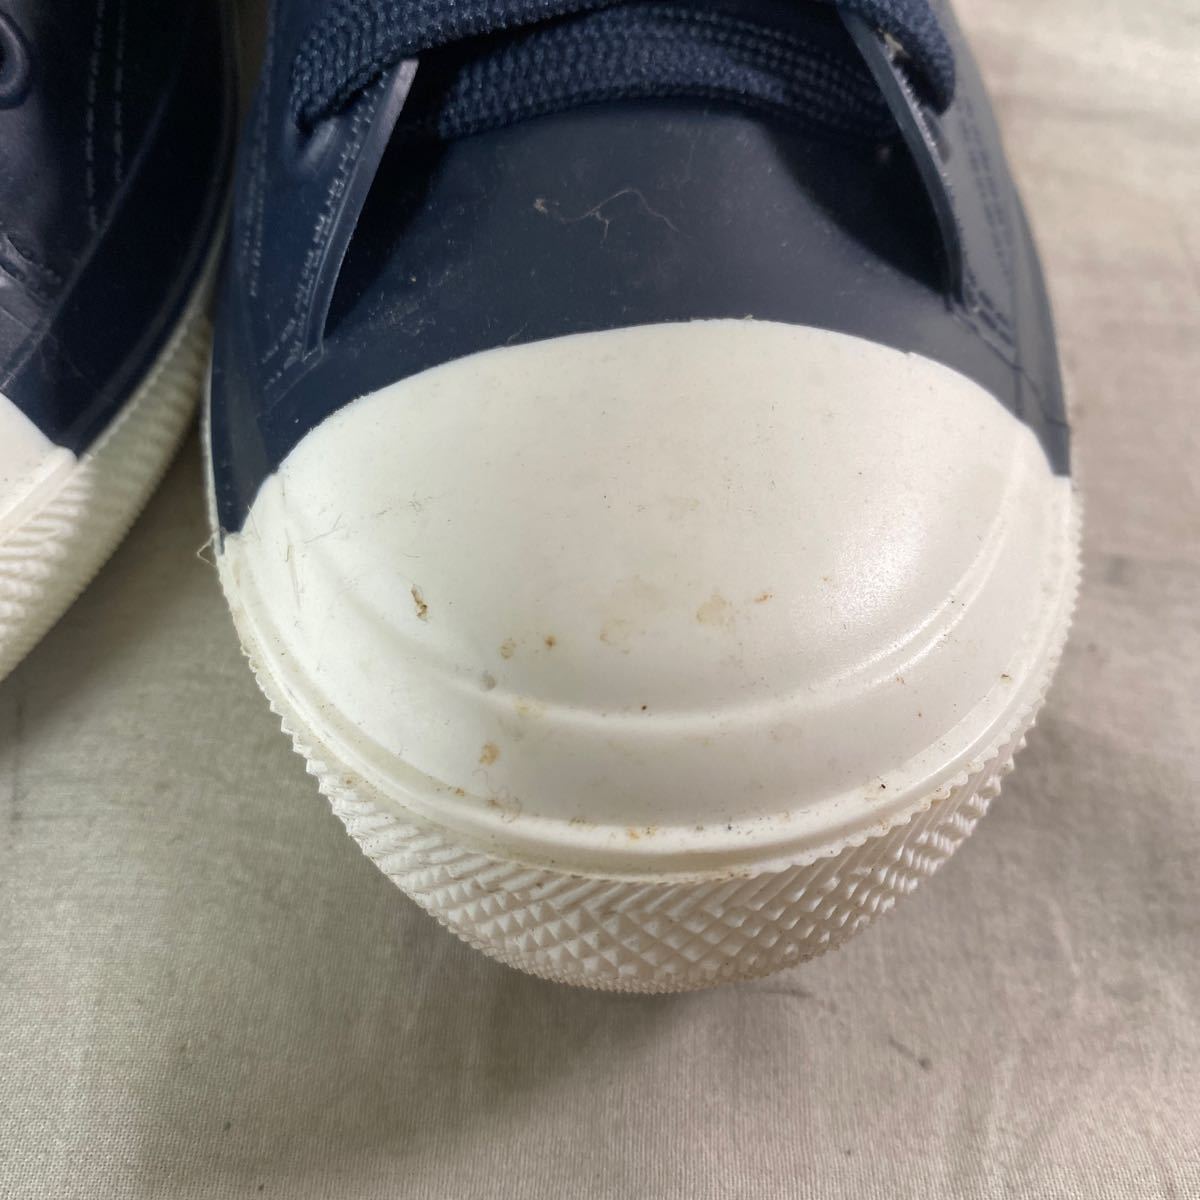 3729* mozmoz shoes shoes sneakers is ikatto sneakers race up shoes lady's M navy box attaching 